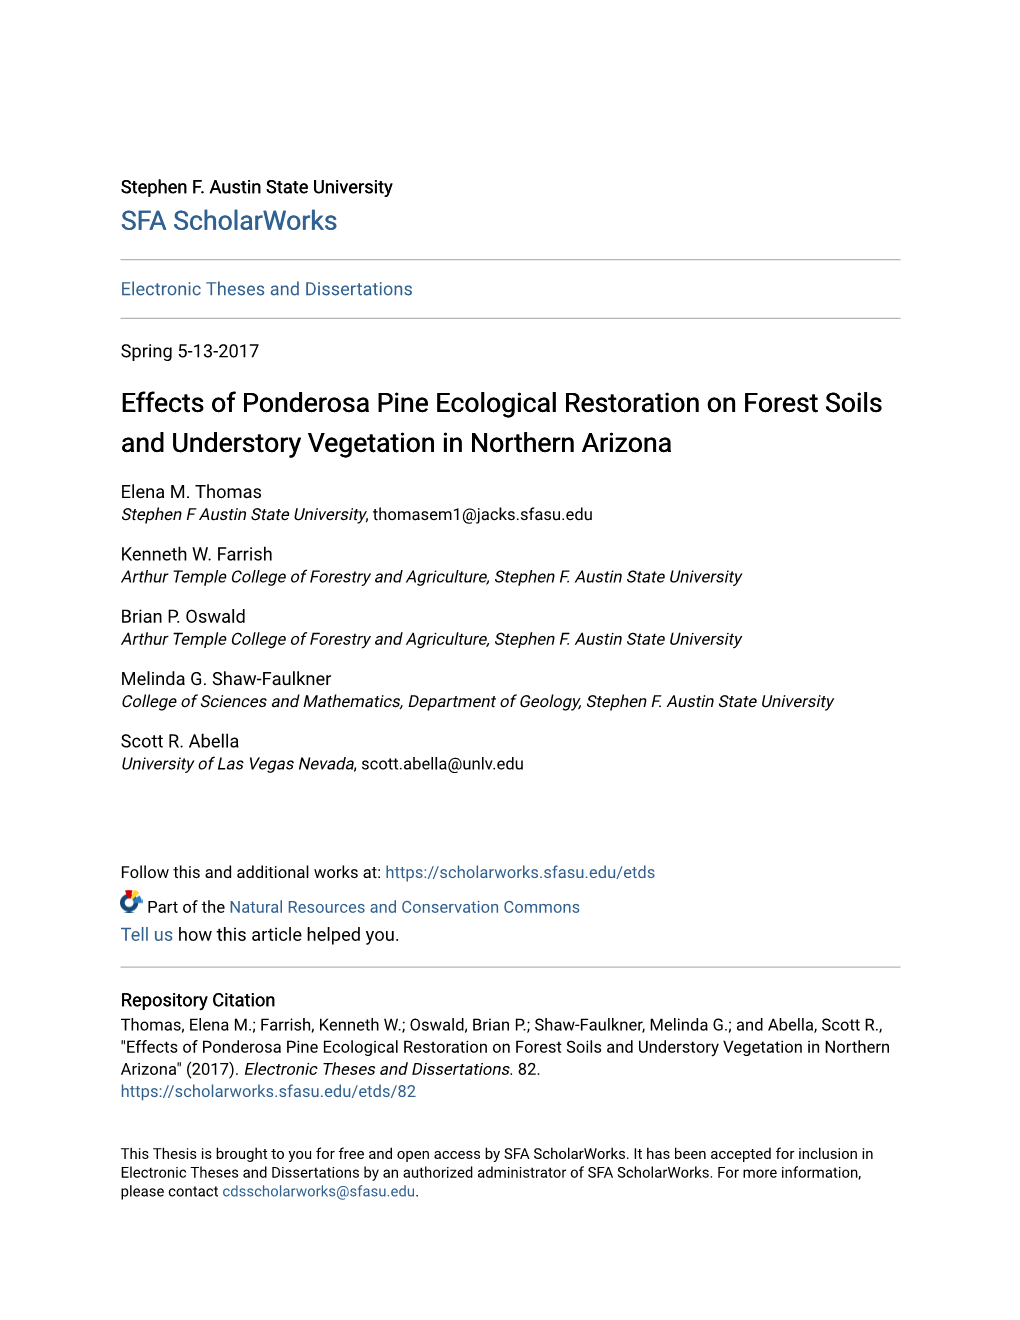 Effects of Ponderosa Pine Ecological Restoration on Forest Soils and Understory Vegetation in Northern Arizona